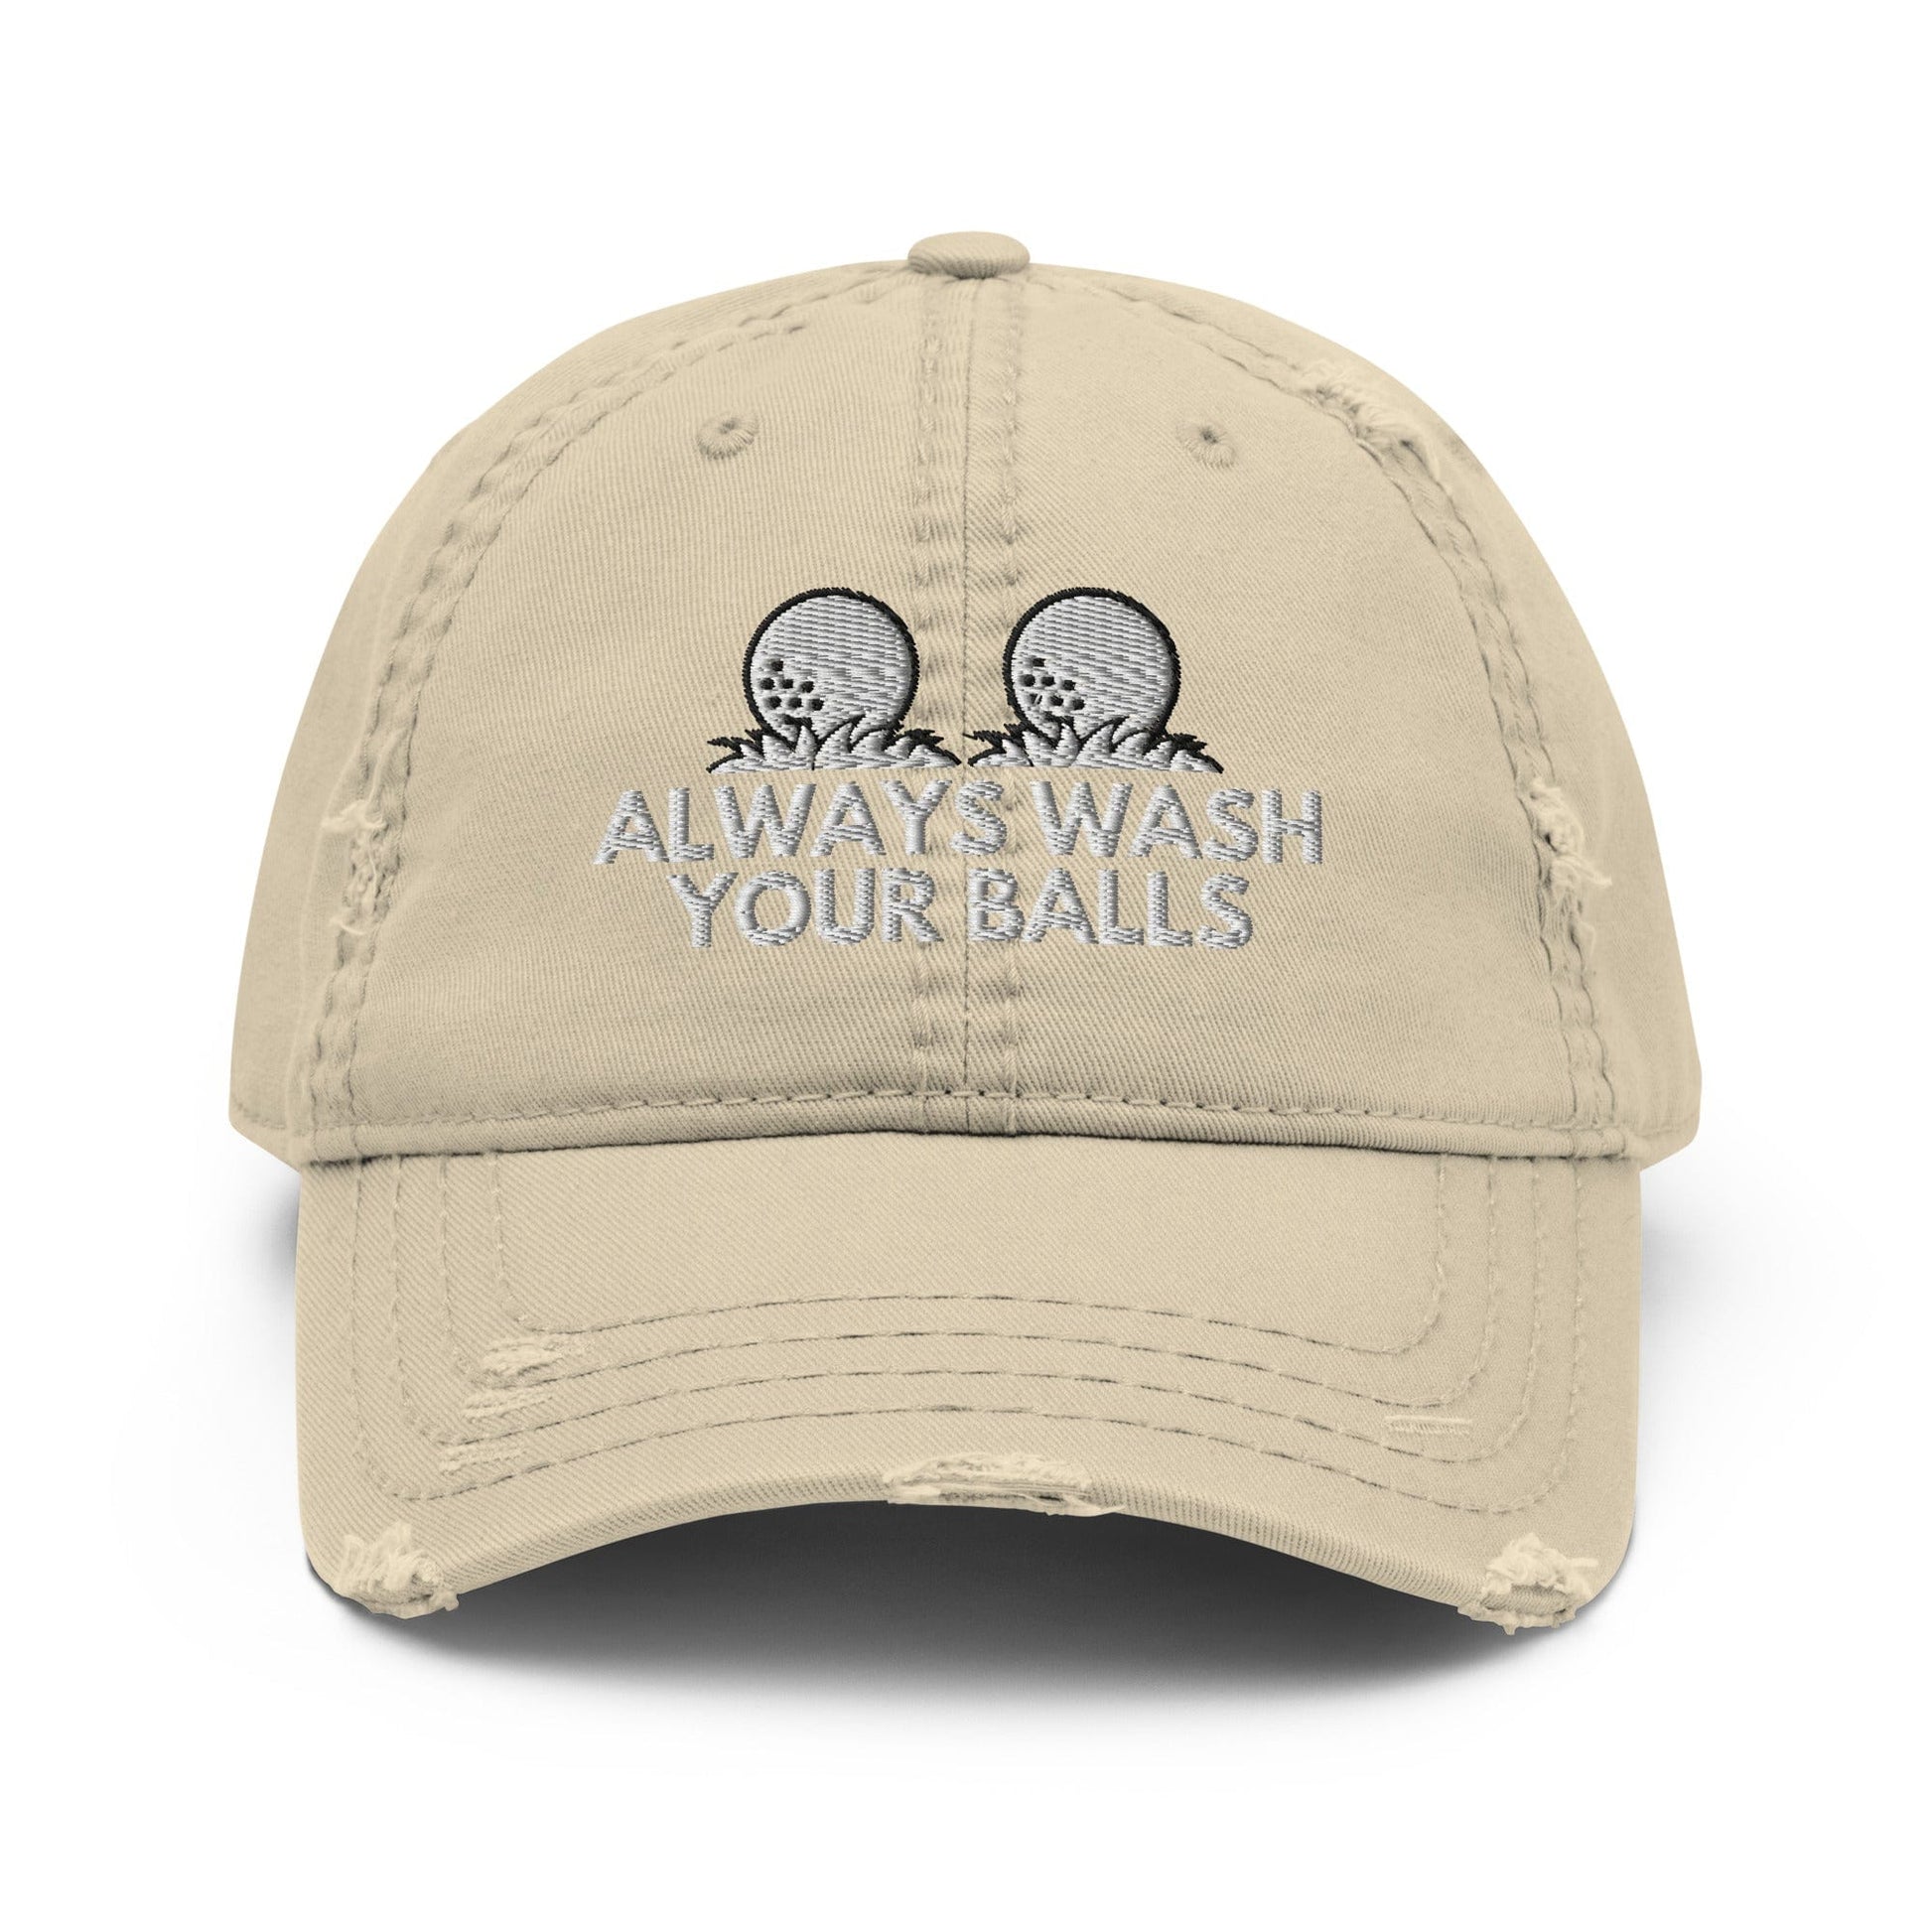 Funny Golfer Gifts  Distressed Cap Khaki Always Wash Your Balls Hat Distressed Hat